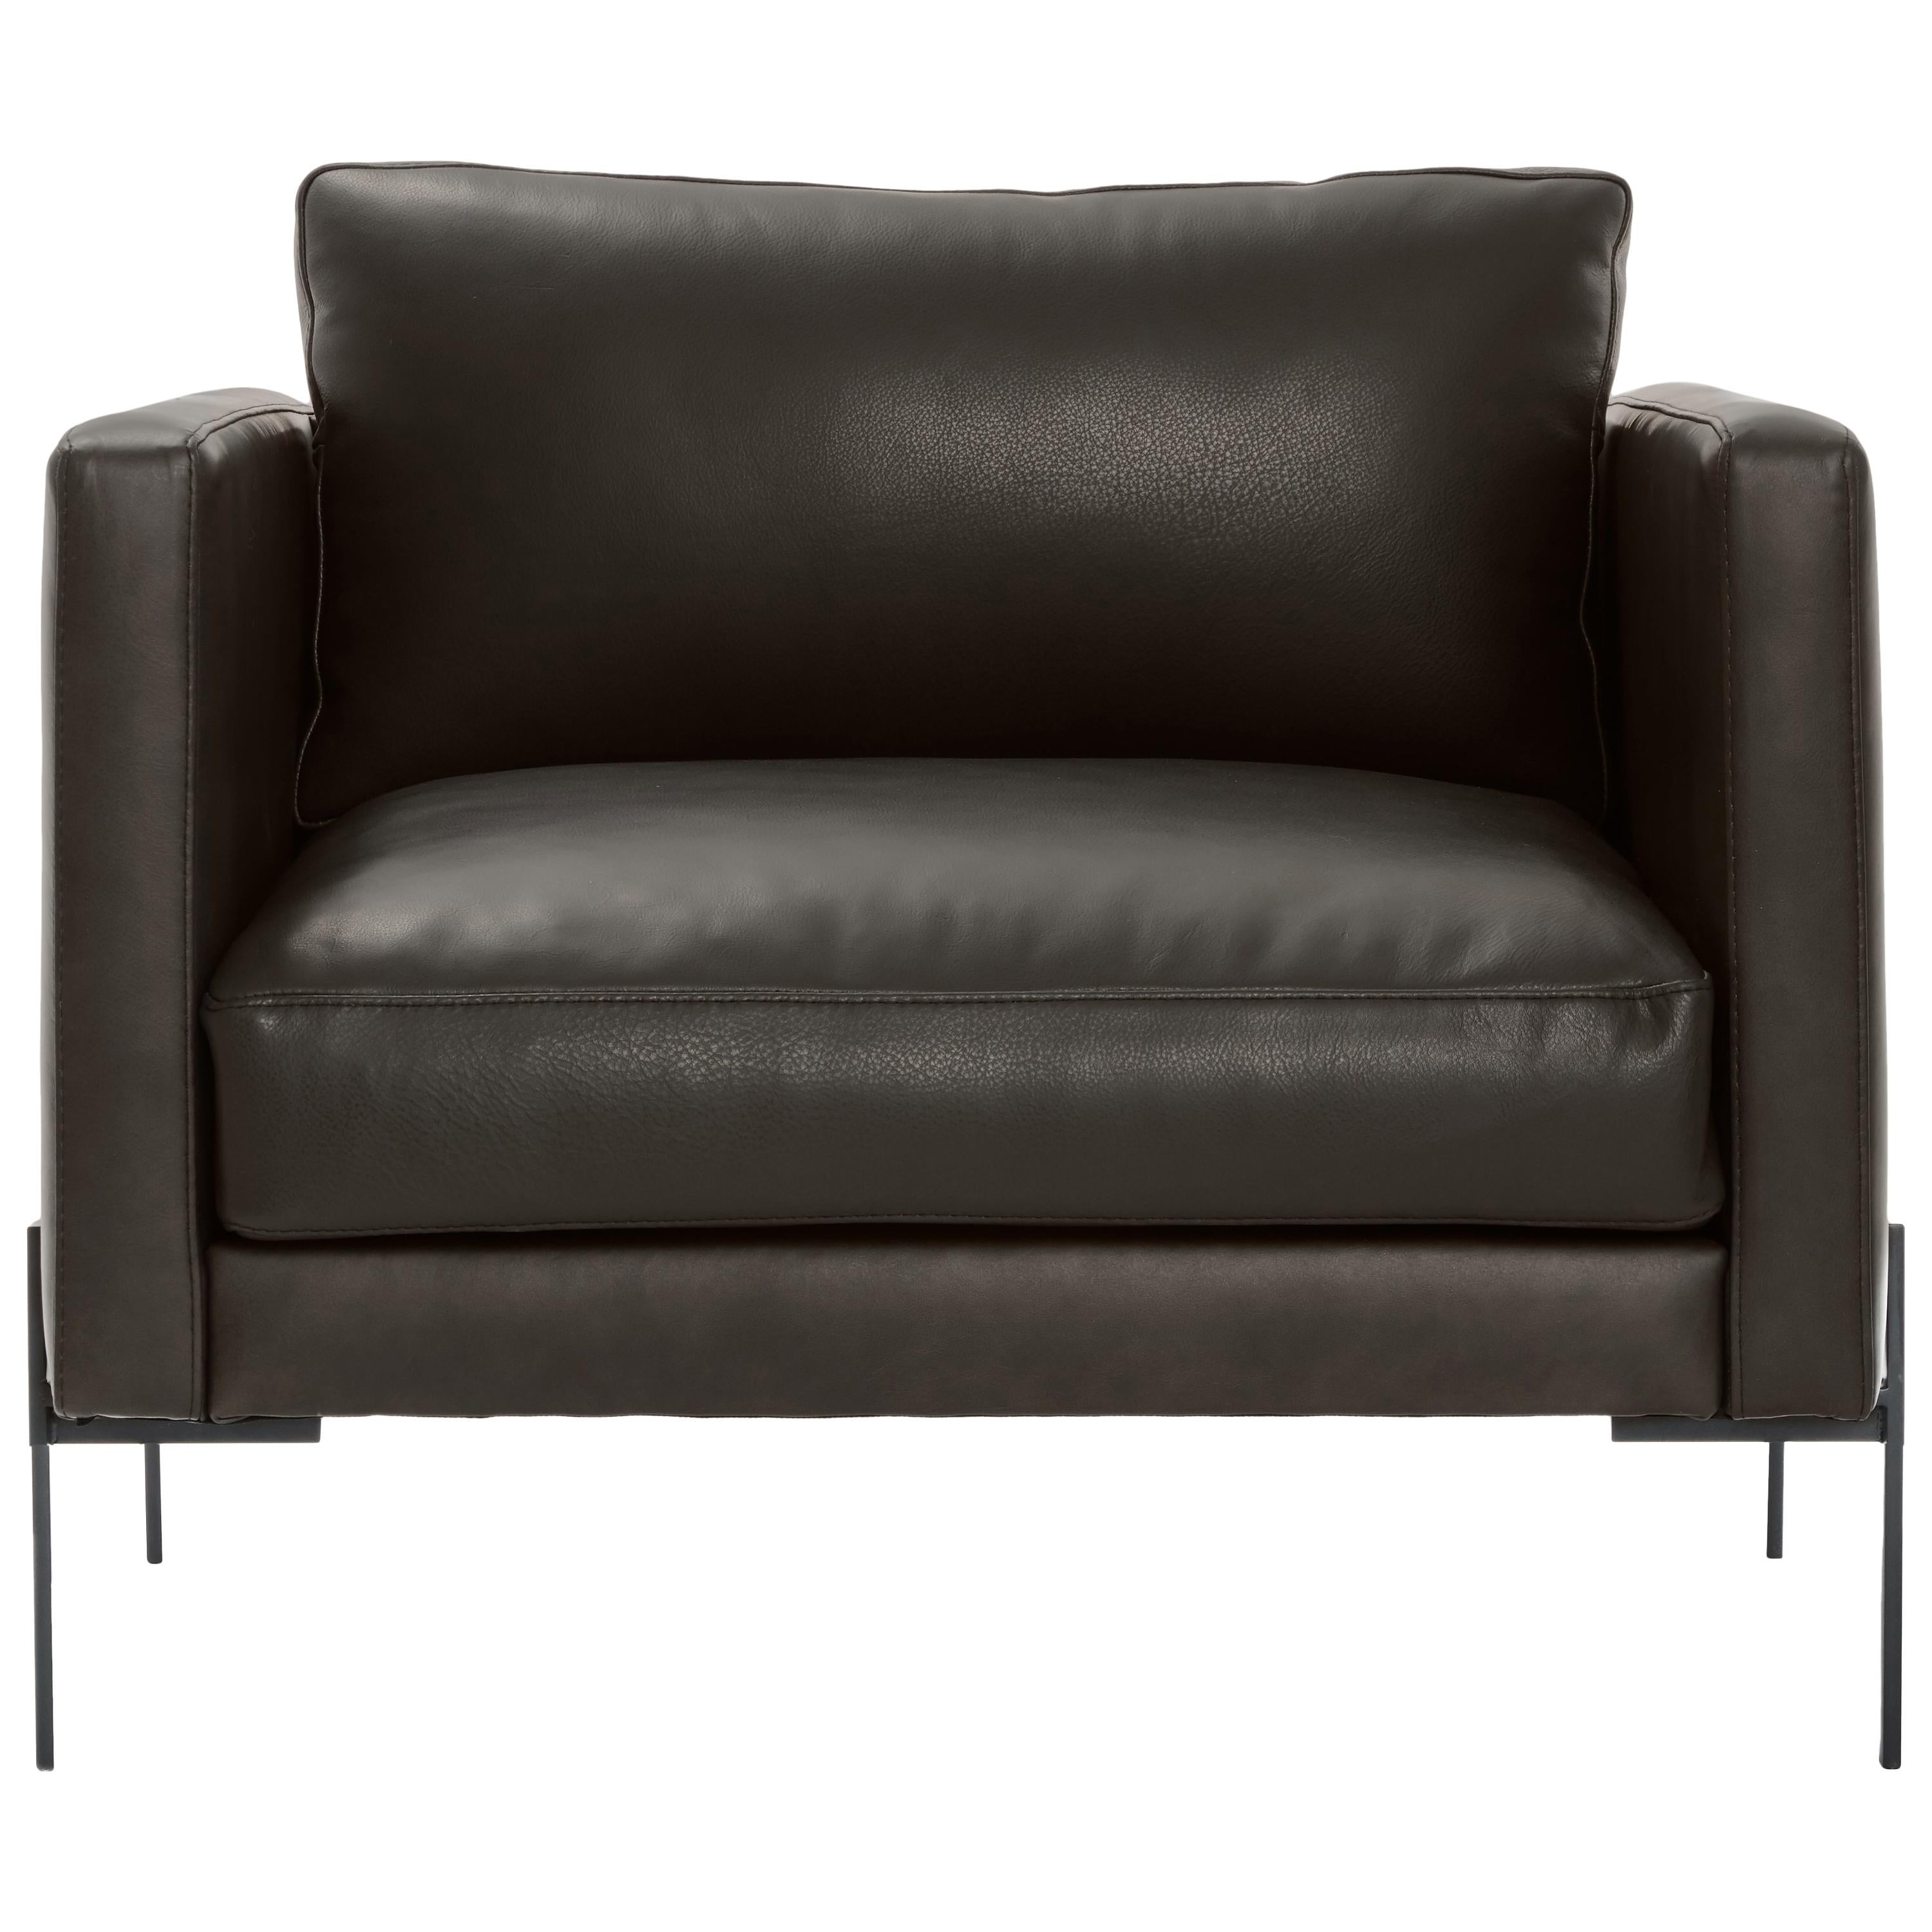 Truss Armchair in Ebony Leather and Powder-Coated Steel by TRNK For Sale